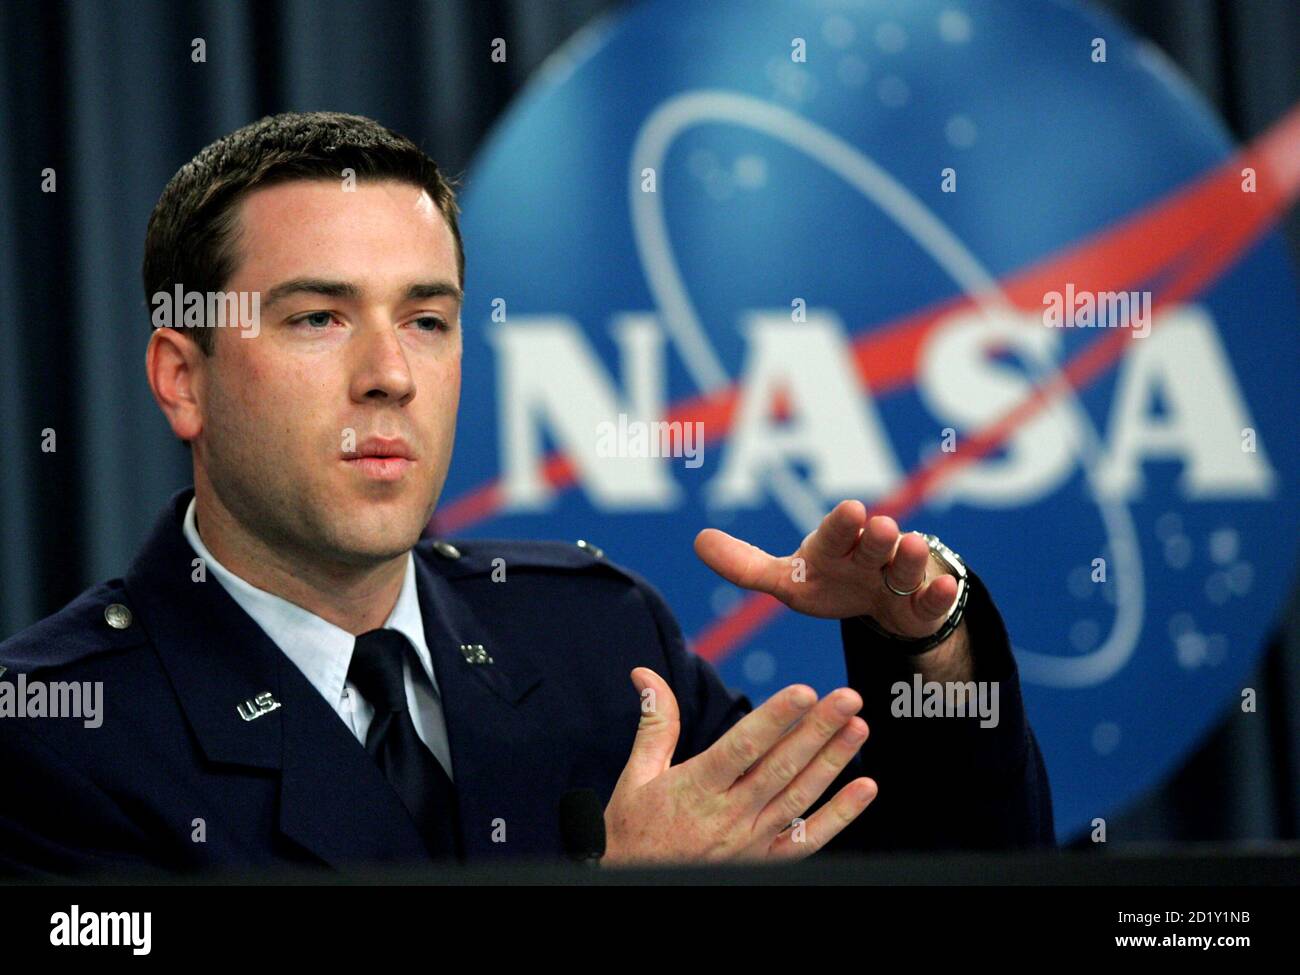 U.S. Air Force 1st Lt. Kaleb Nordgren of the 4th Weather Squadron speaks at the Kennedy Space Center in Cape Canaveral, Florida September 7, 2006. NASA has decided to launch the space shuttle Atlantis on September 8.  REUTERS/Rick Fowler  (UNITED STATES) Foto Stock